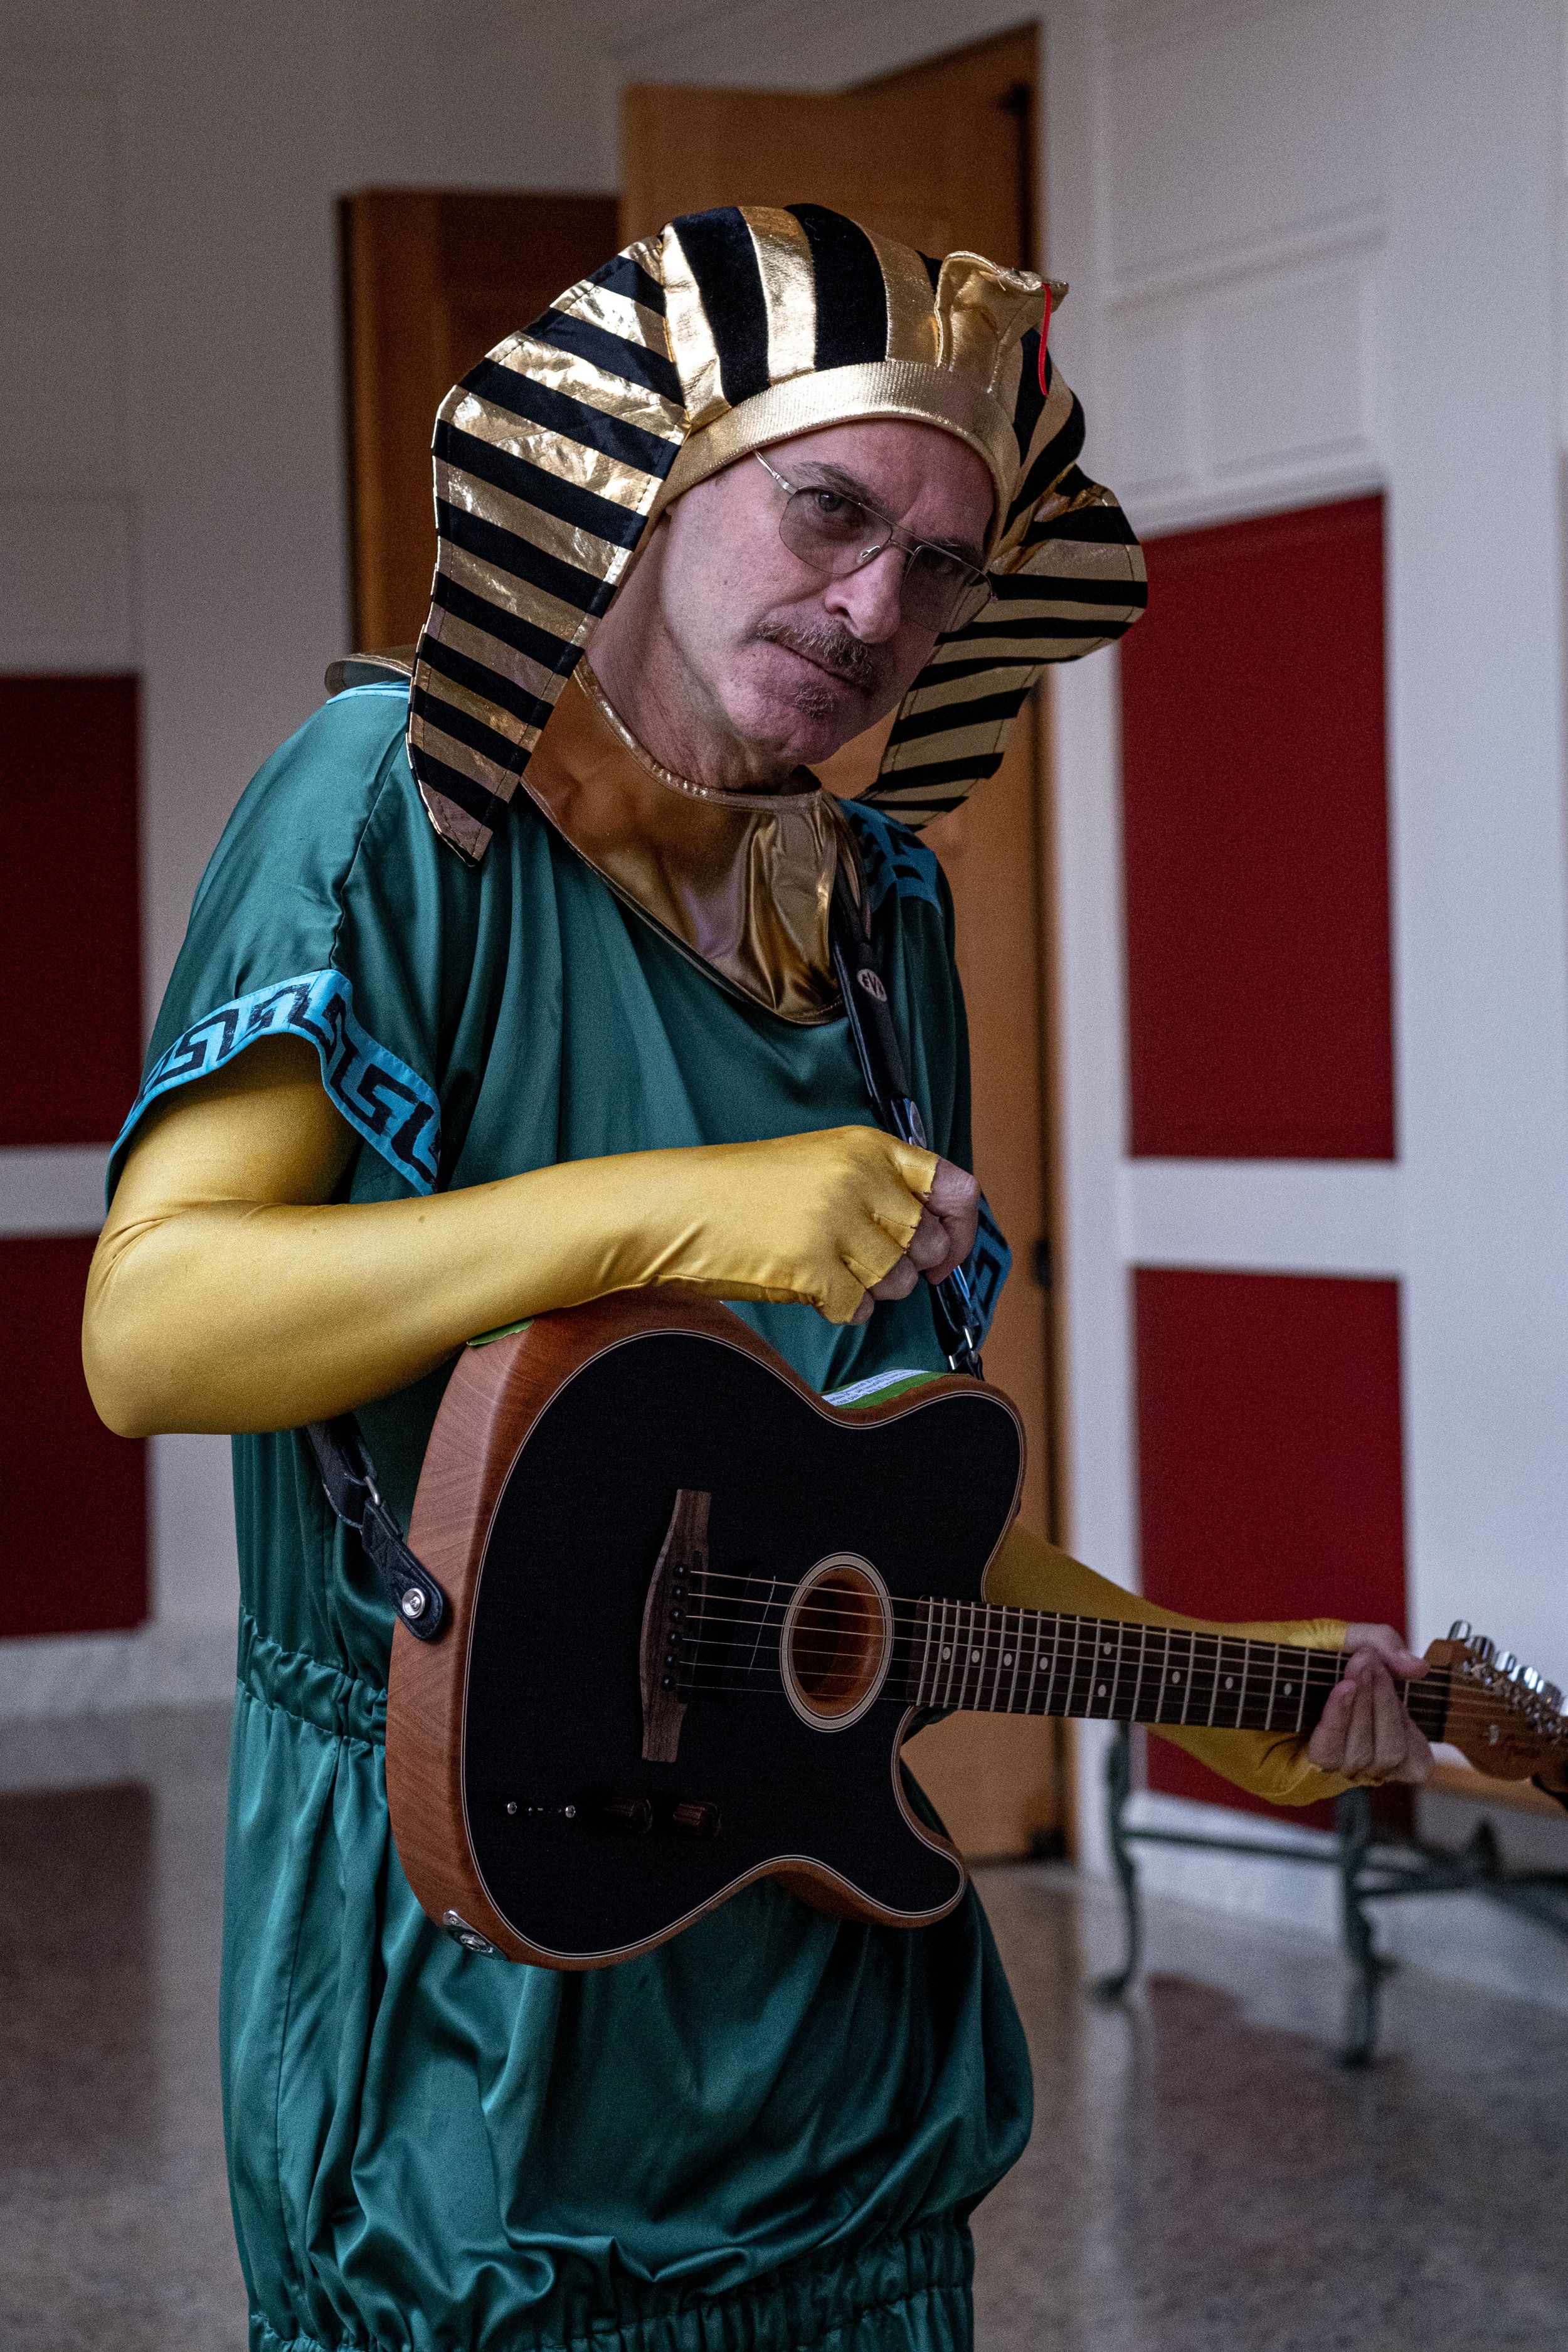  The Sphinx, member of The Troubadour Theater, aka "The Troubies," roams the halls with his guitar at the Getty Villa Museum in Pacific Palisades, Calif. on Wednesday, March 22, 2023 at College Night. (Akemi Rico | The Corsair) 